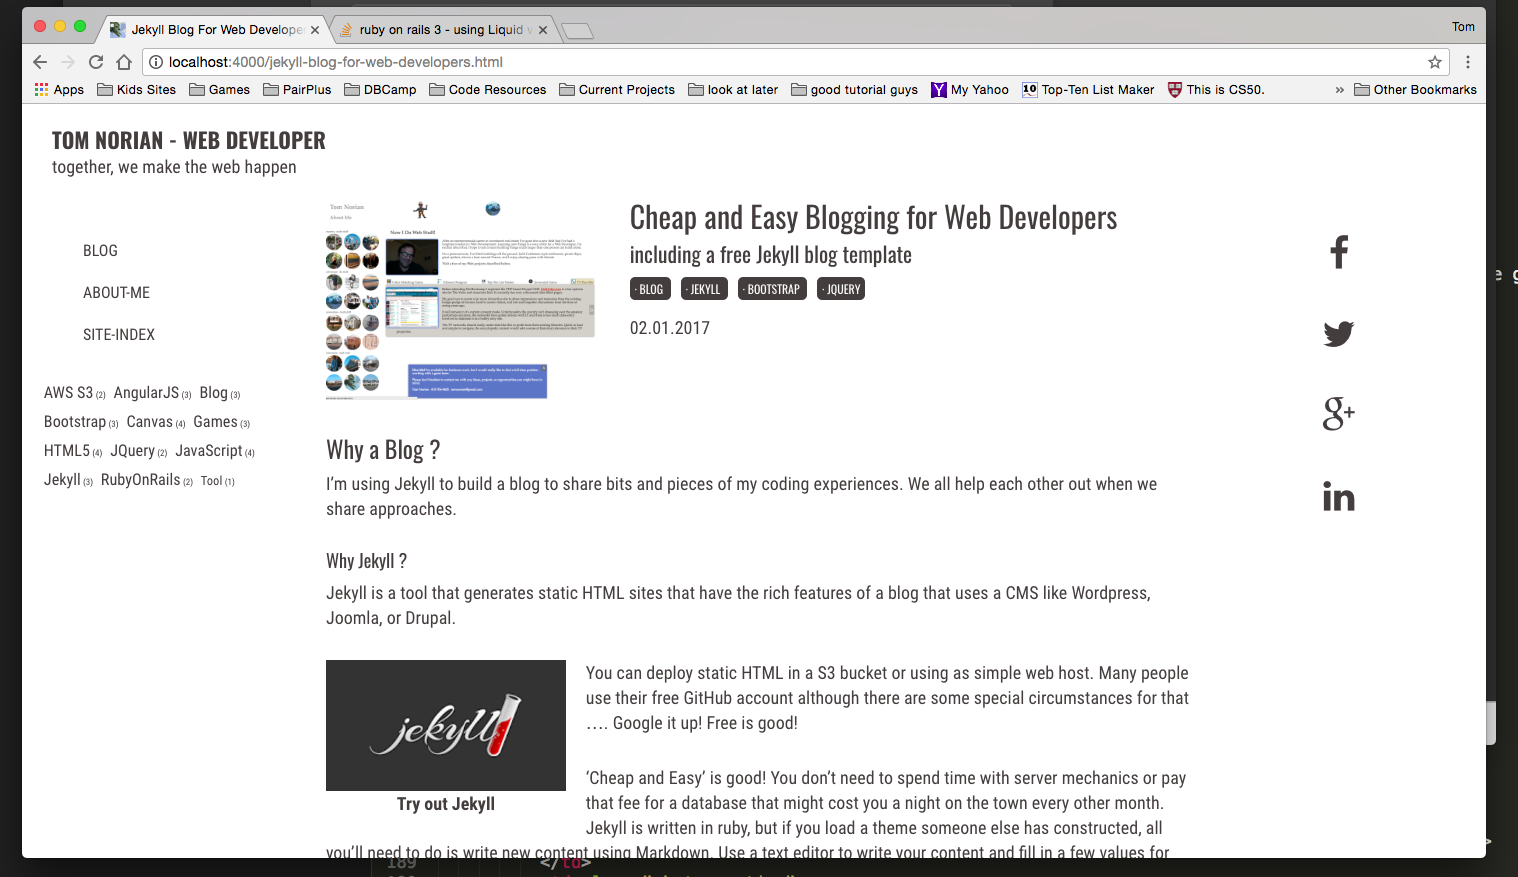 Cheap and Easy Blogging for Web Developers lead-image